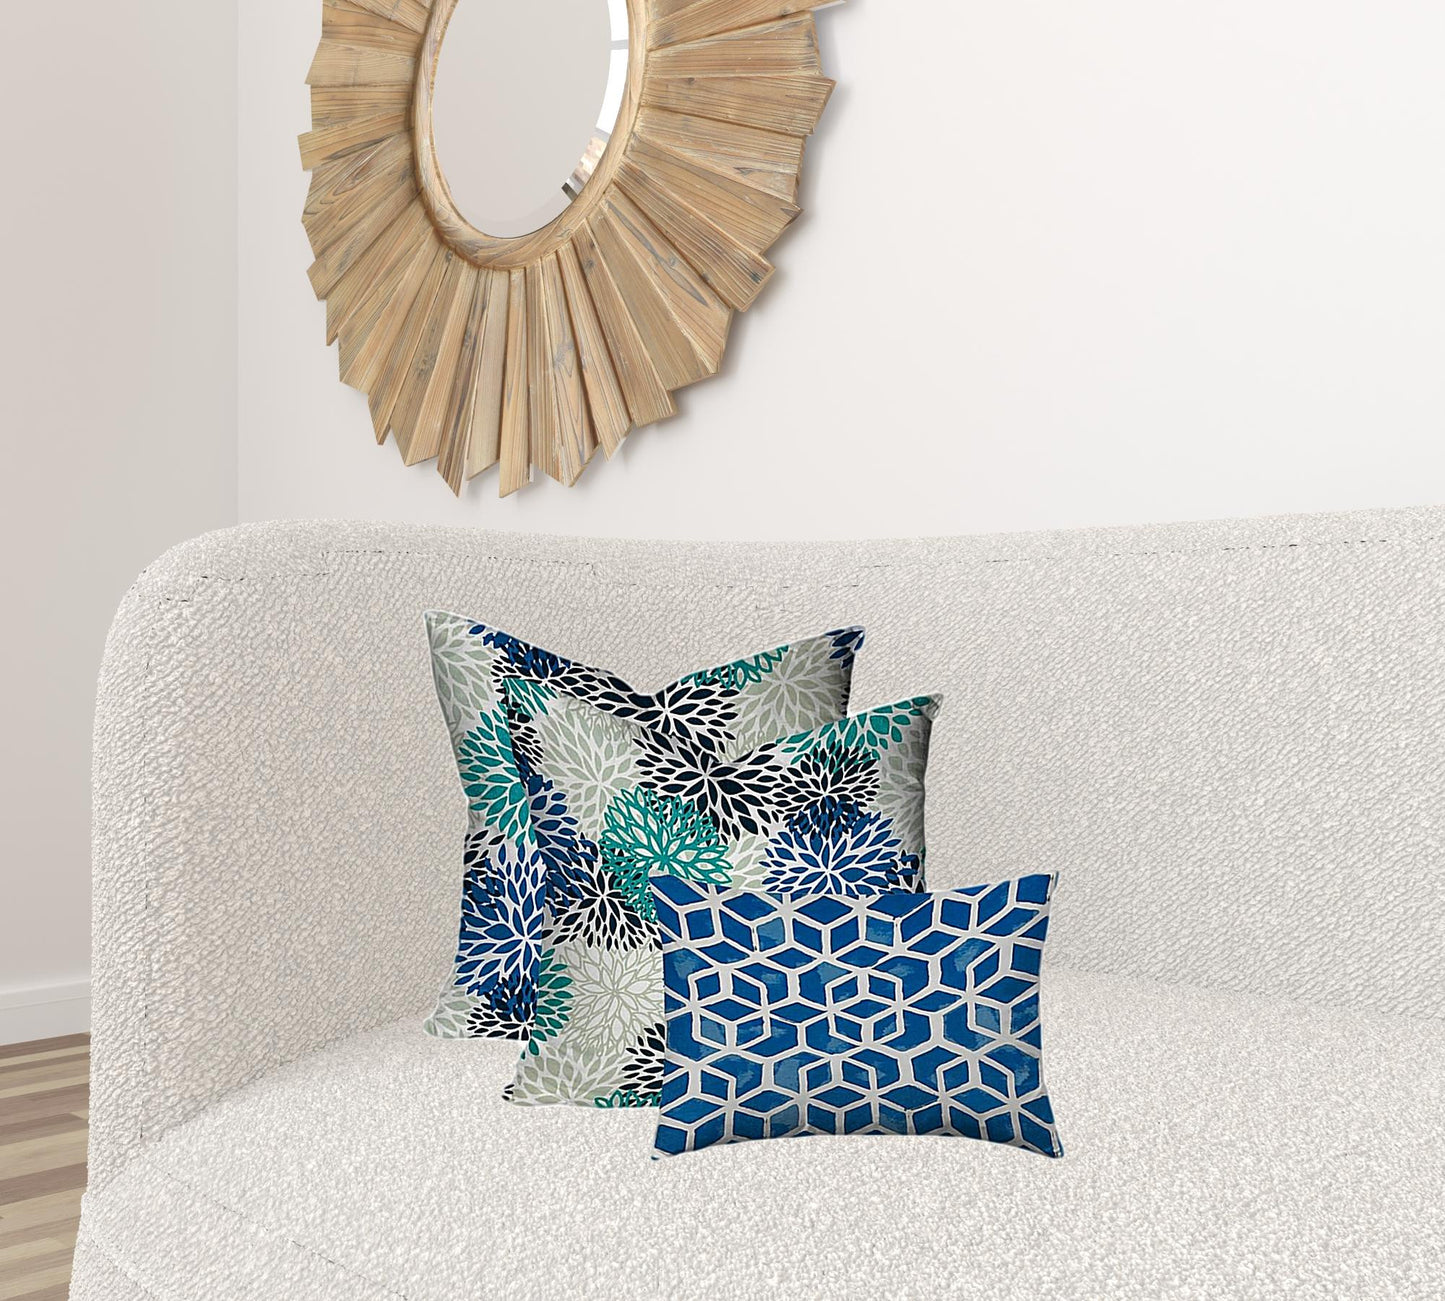 Set Of Three 20" X 20" Blue And White Enveloped Floral Throw Indoor Outdoor Pillow